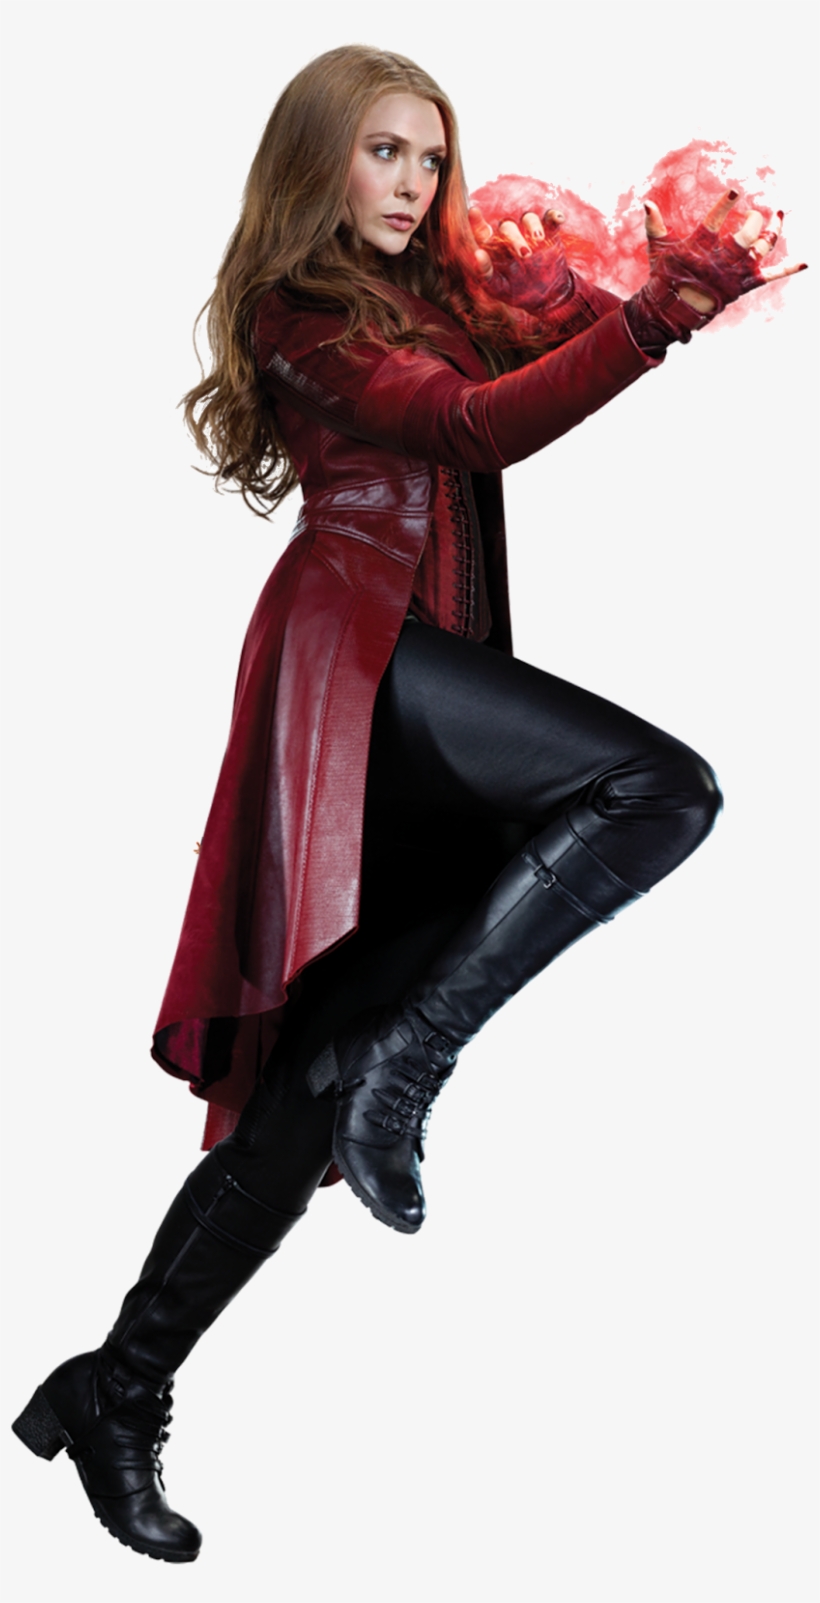 Png Feiticeira Escarlate - Captain America 3 Civil War Wanda Scarlet Witch Cosplay, transparent png #741747